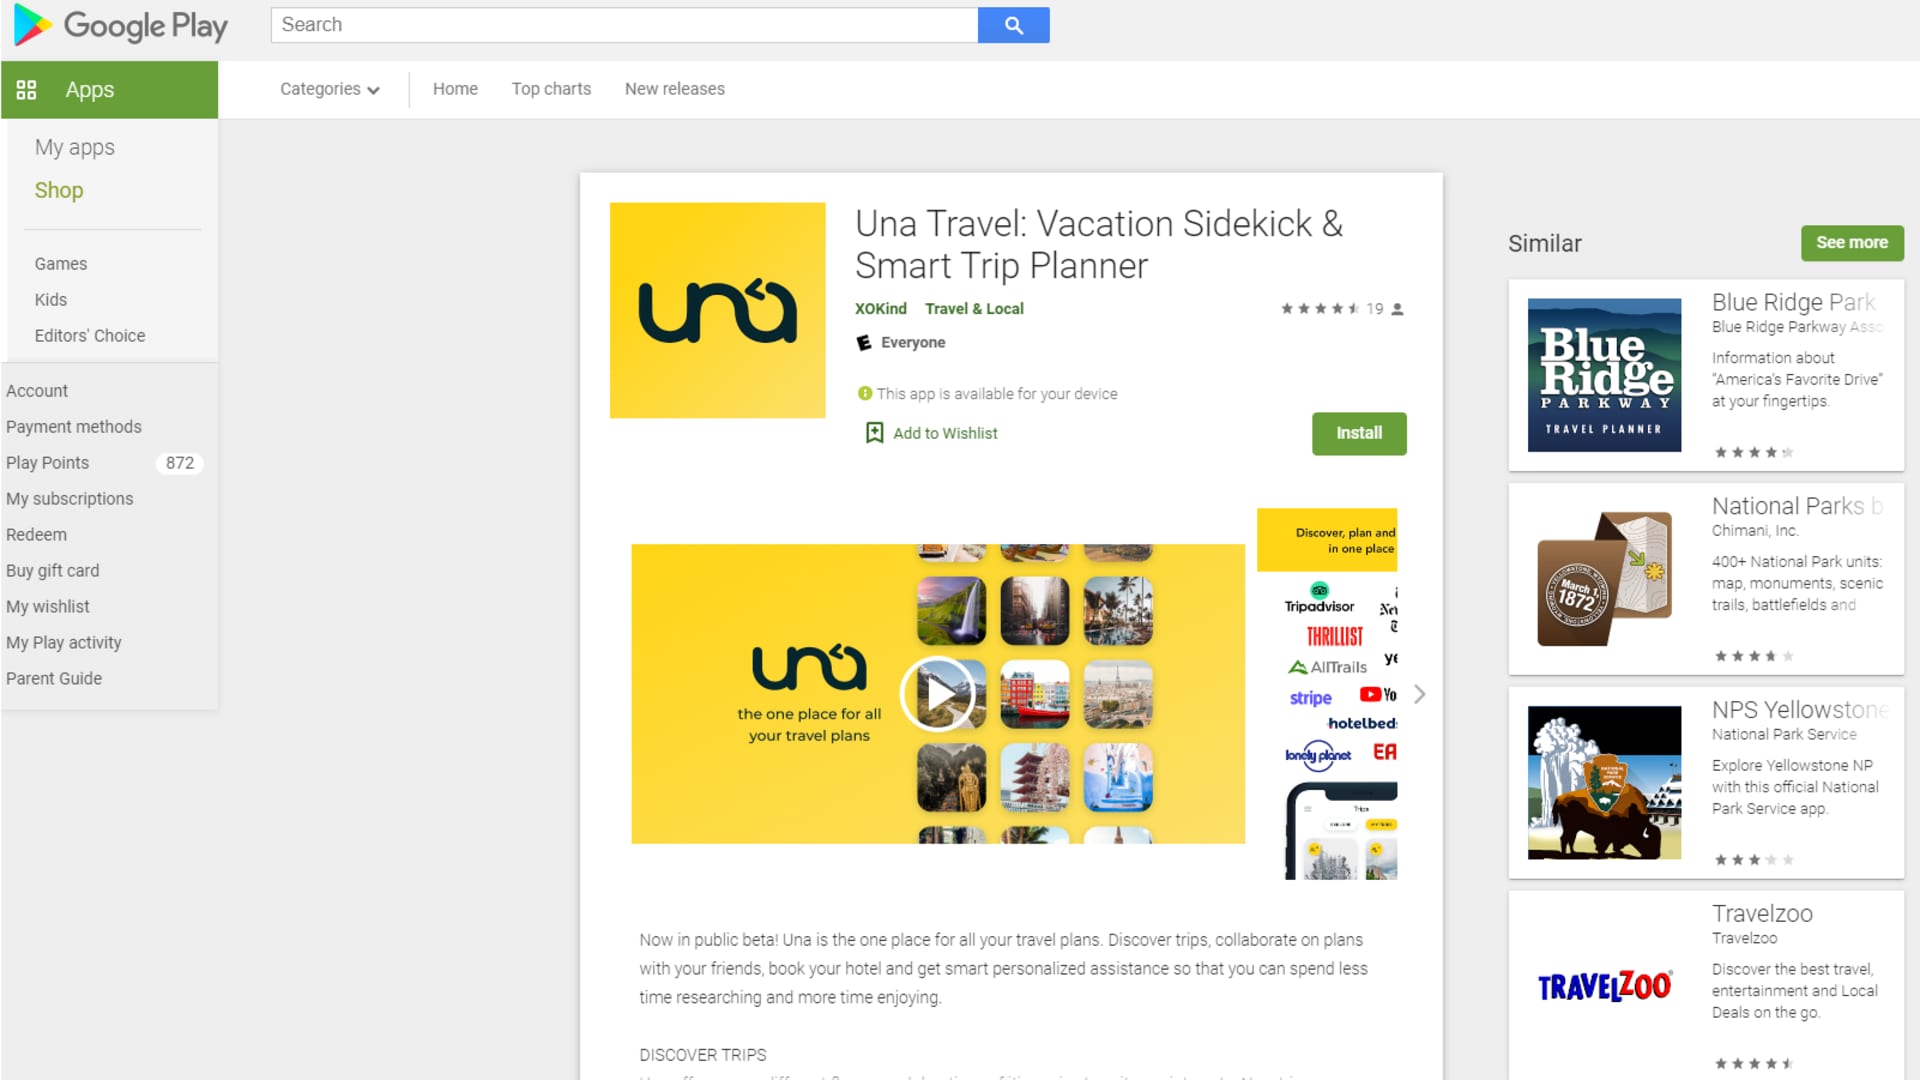 XOKind's Una Travel: Vacation Sidekick & Smart Trip Planner is now available in the Google Play and Apple app stores.